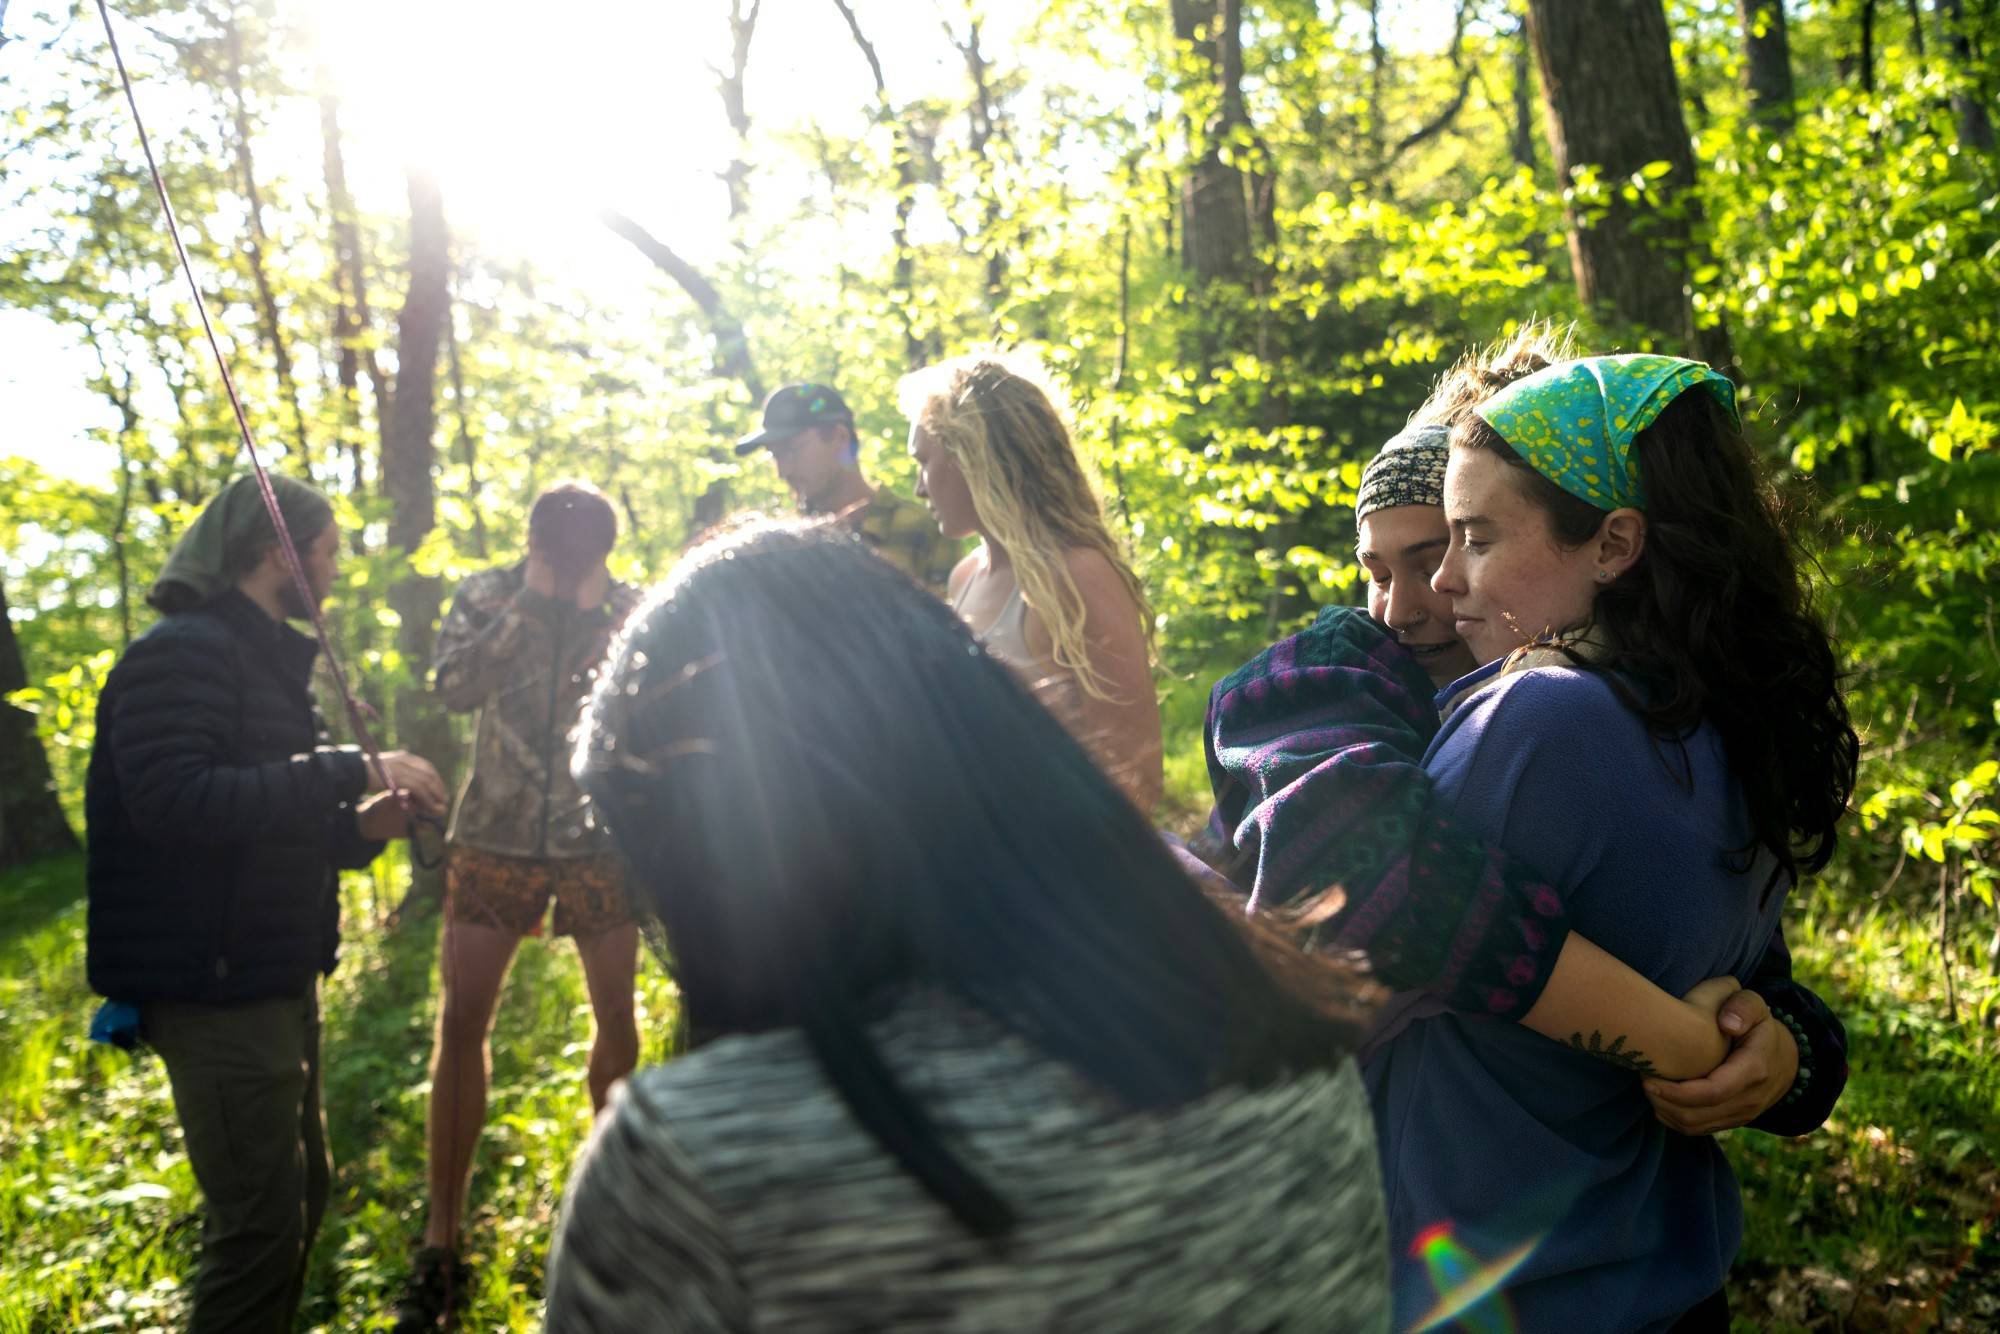 Autumn Warren (left) and Emelia Adams share a hug on the trail. The students grew close during the 28 days they spent together in the wilderness.